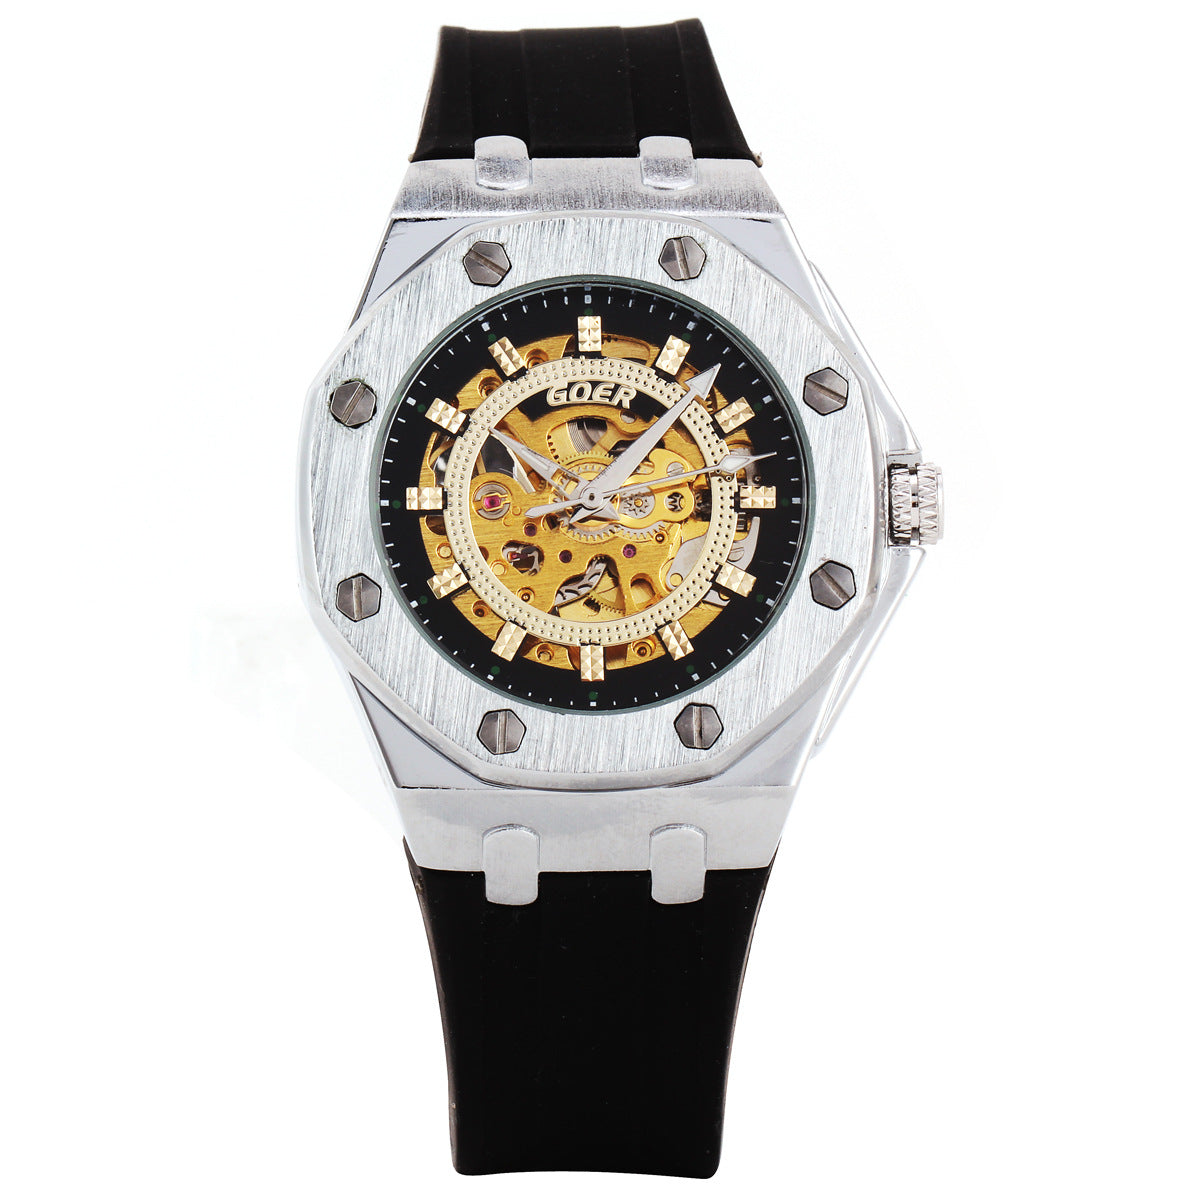 Automatic hollow mechanical watch silicone band watch men's